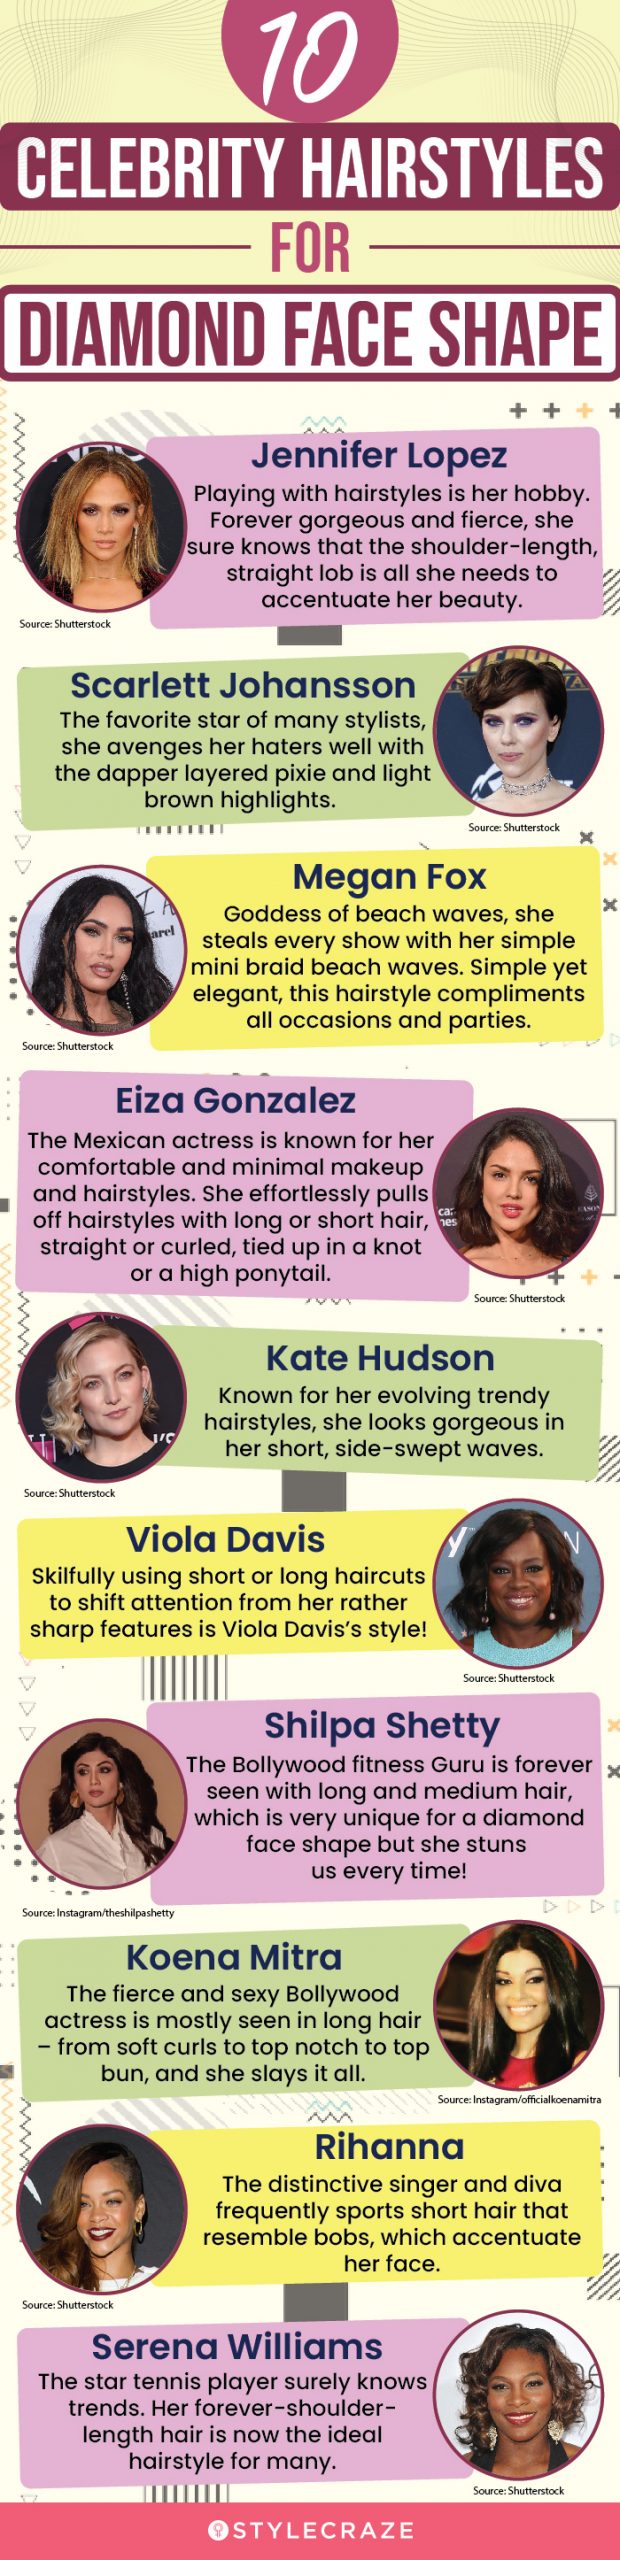 10 celebrity hairstyles for diamond face shape (infographic)